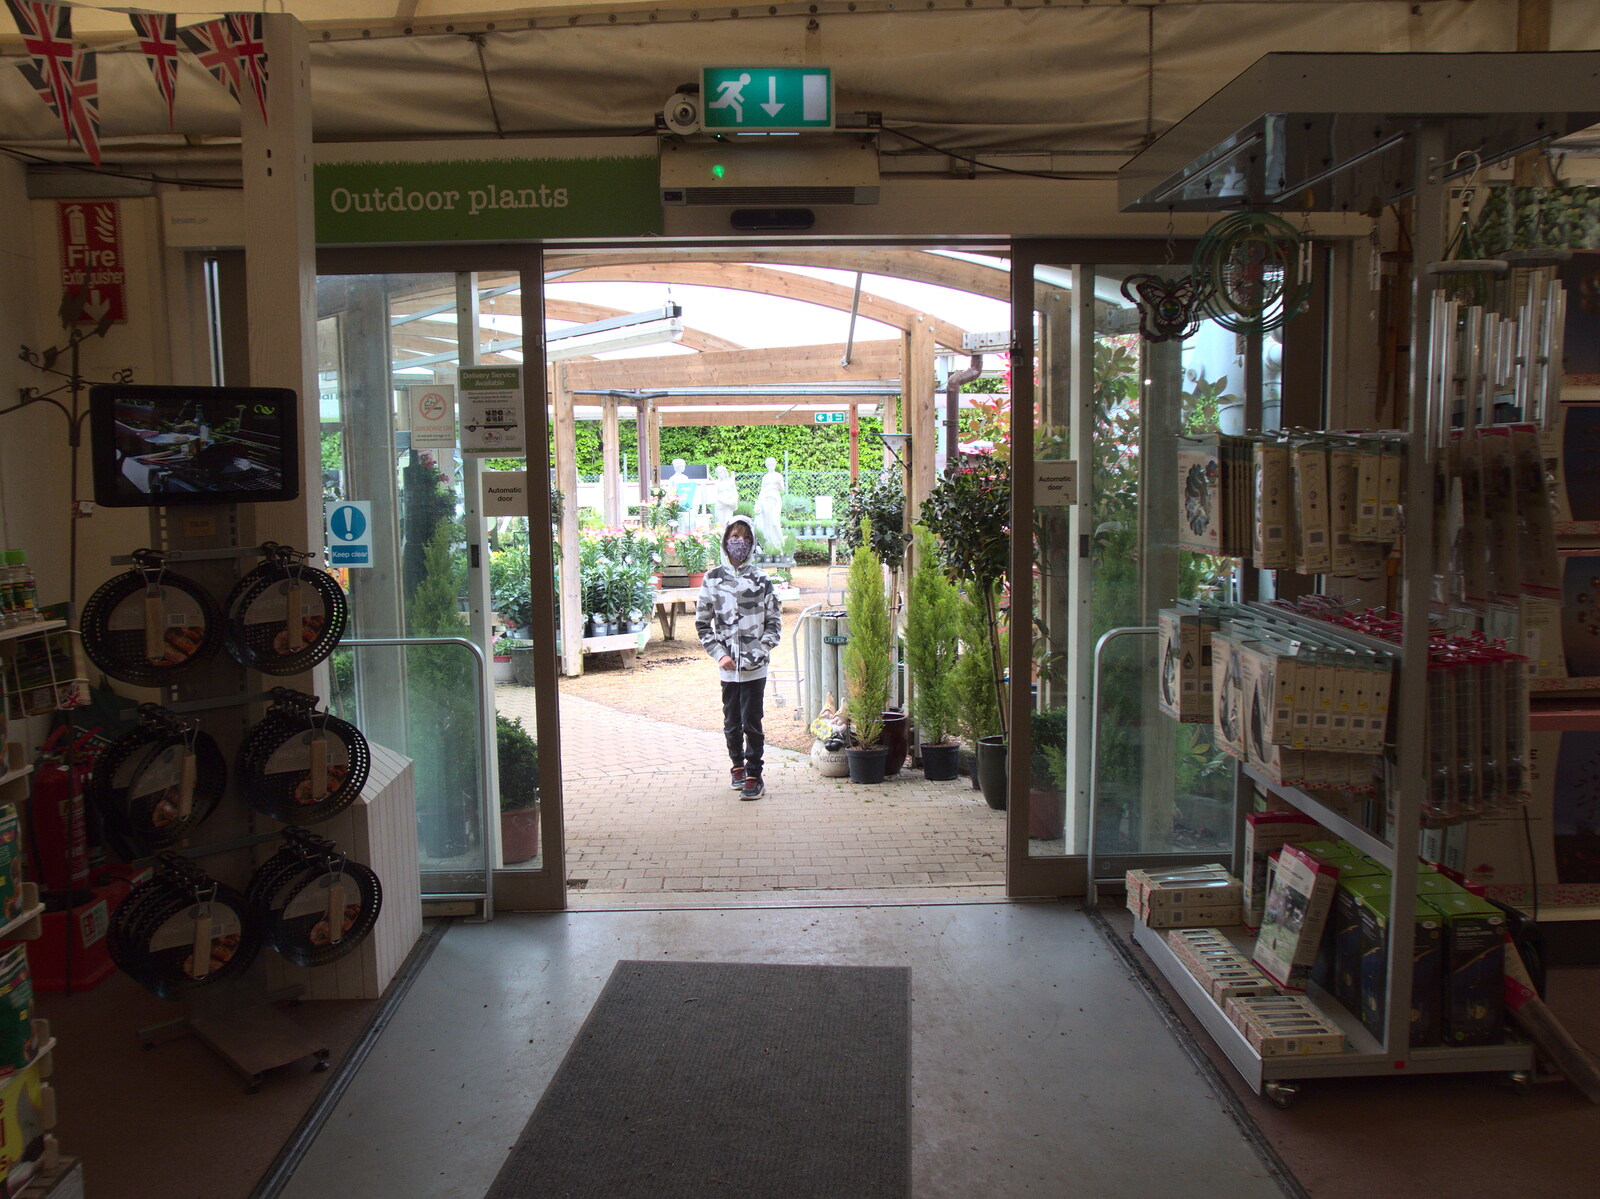 Harry teases the automatic doors from Garden Centres, and Hamish Visits, Brome, Suffolk - 28th May 2021